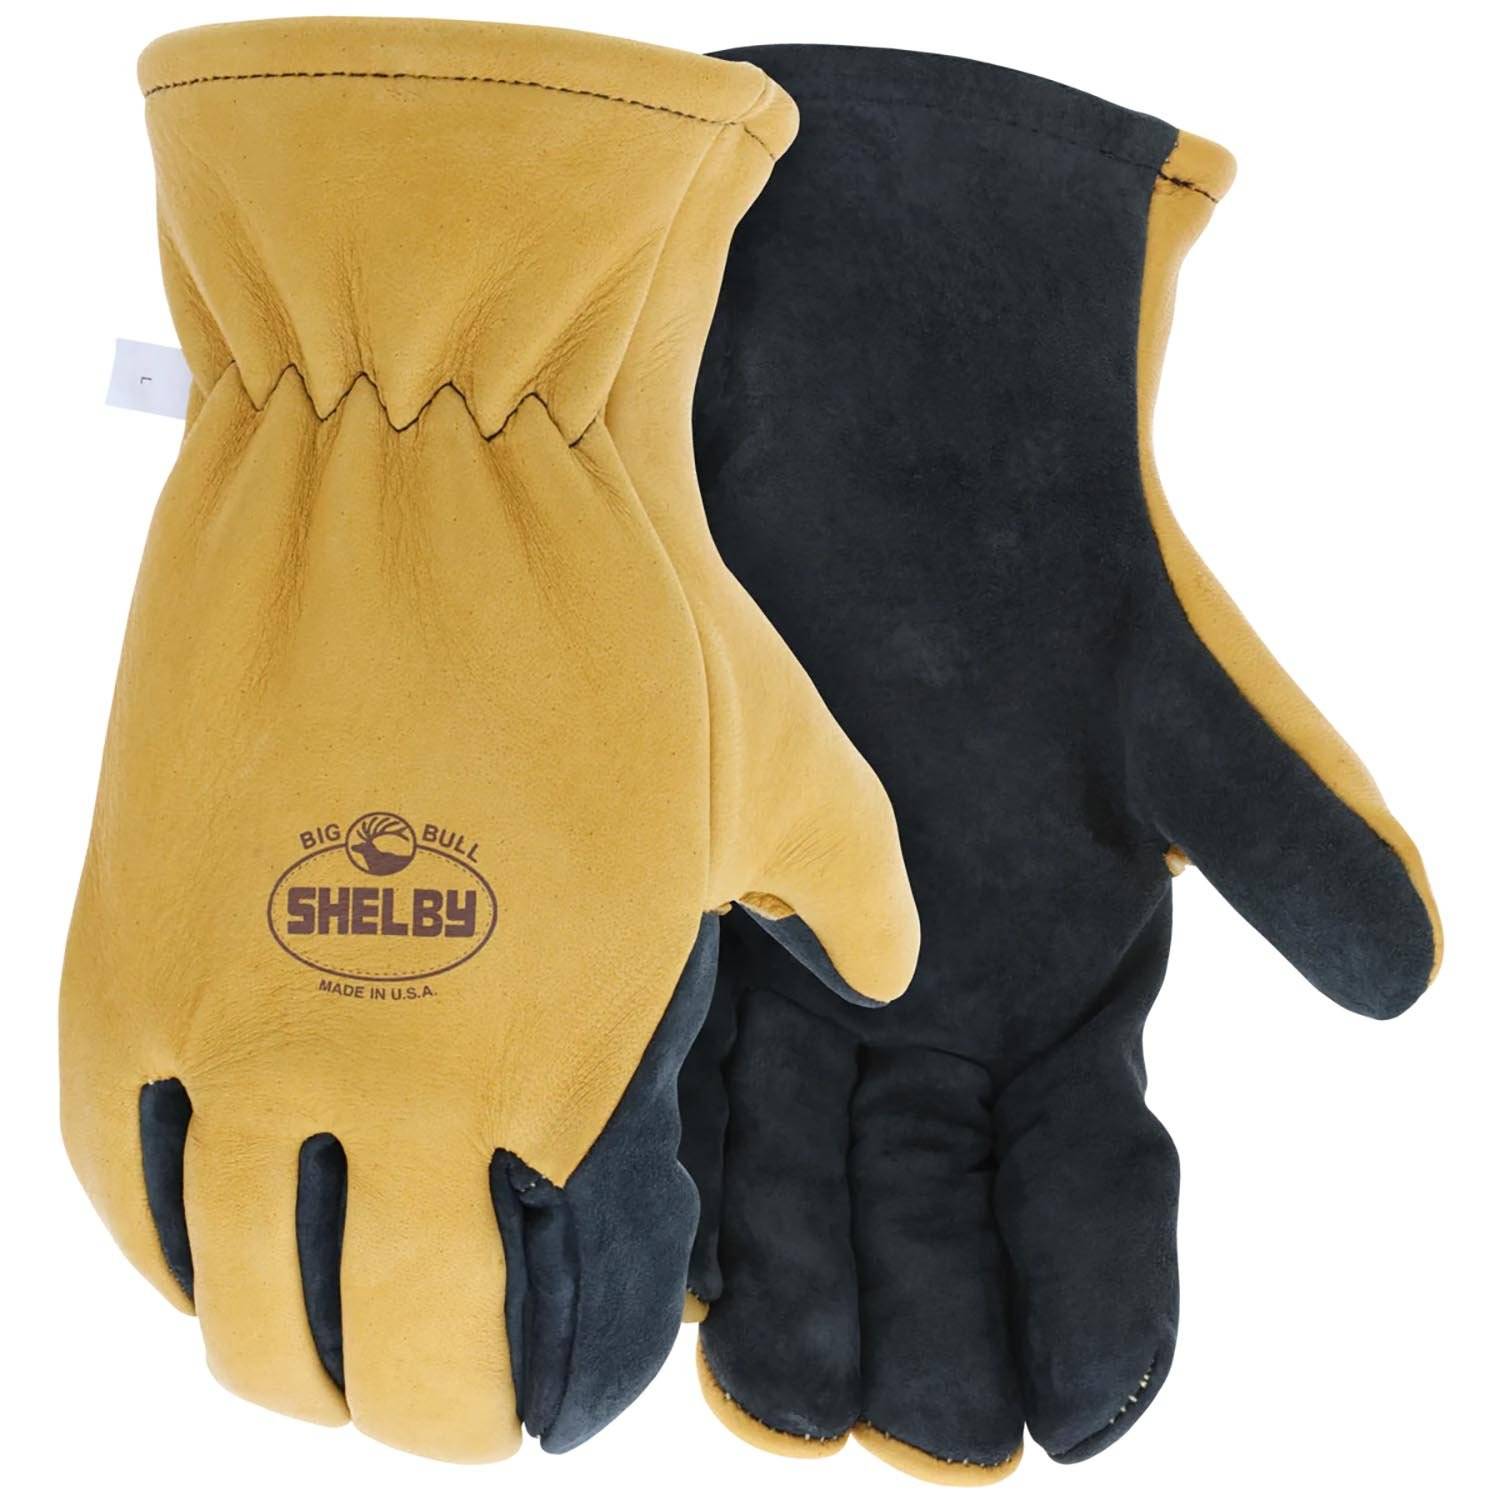 Shelby Big Bull Fire Gauntlet Gloves